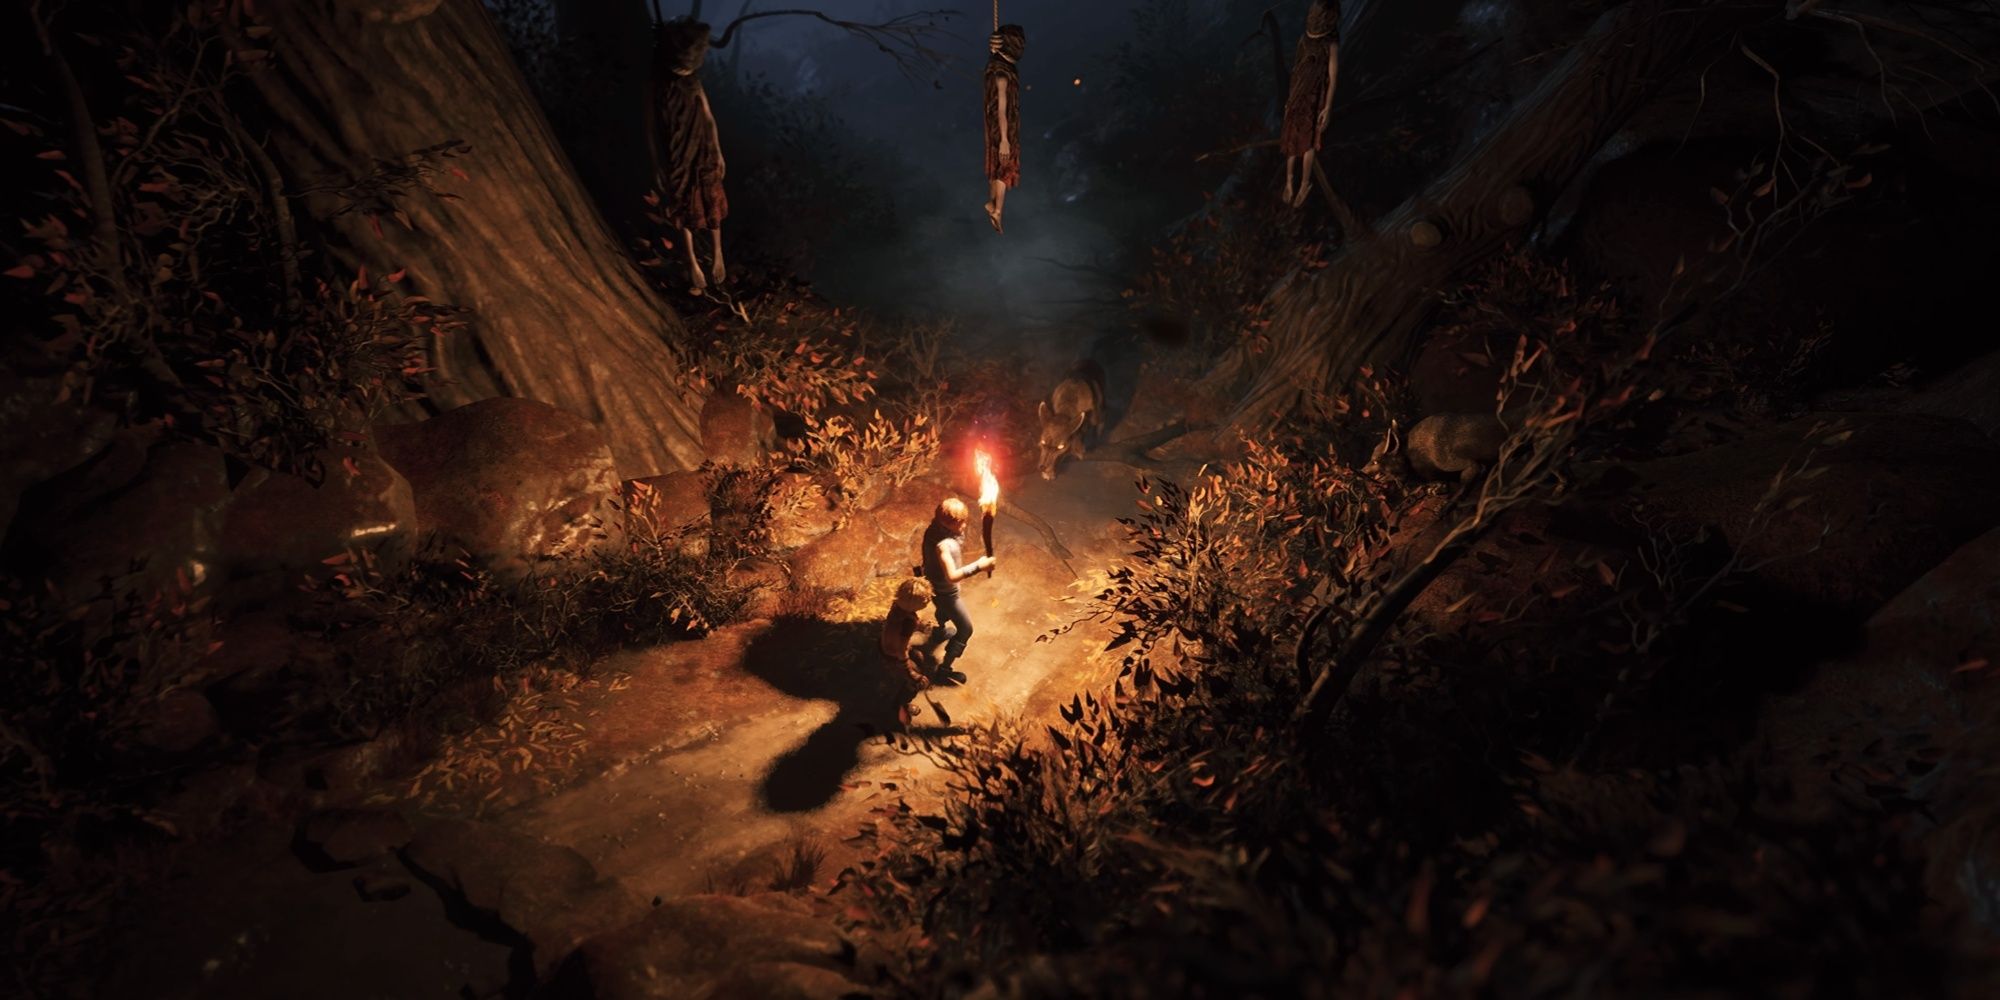 Naia and Naiee face down a wolf in a dark forest in Brothers A Tale of Two Sons Remake